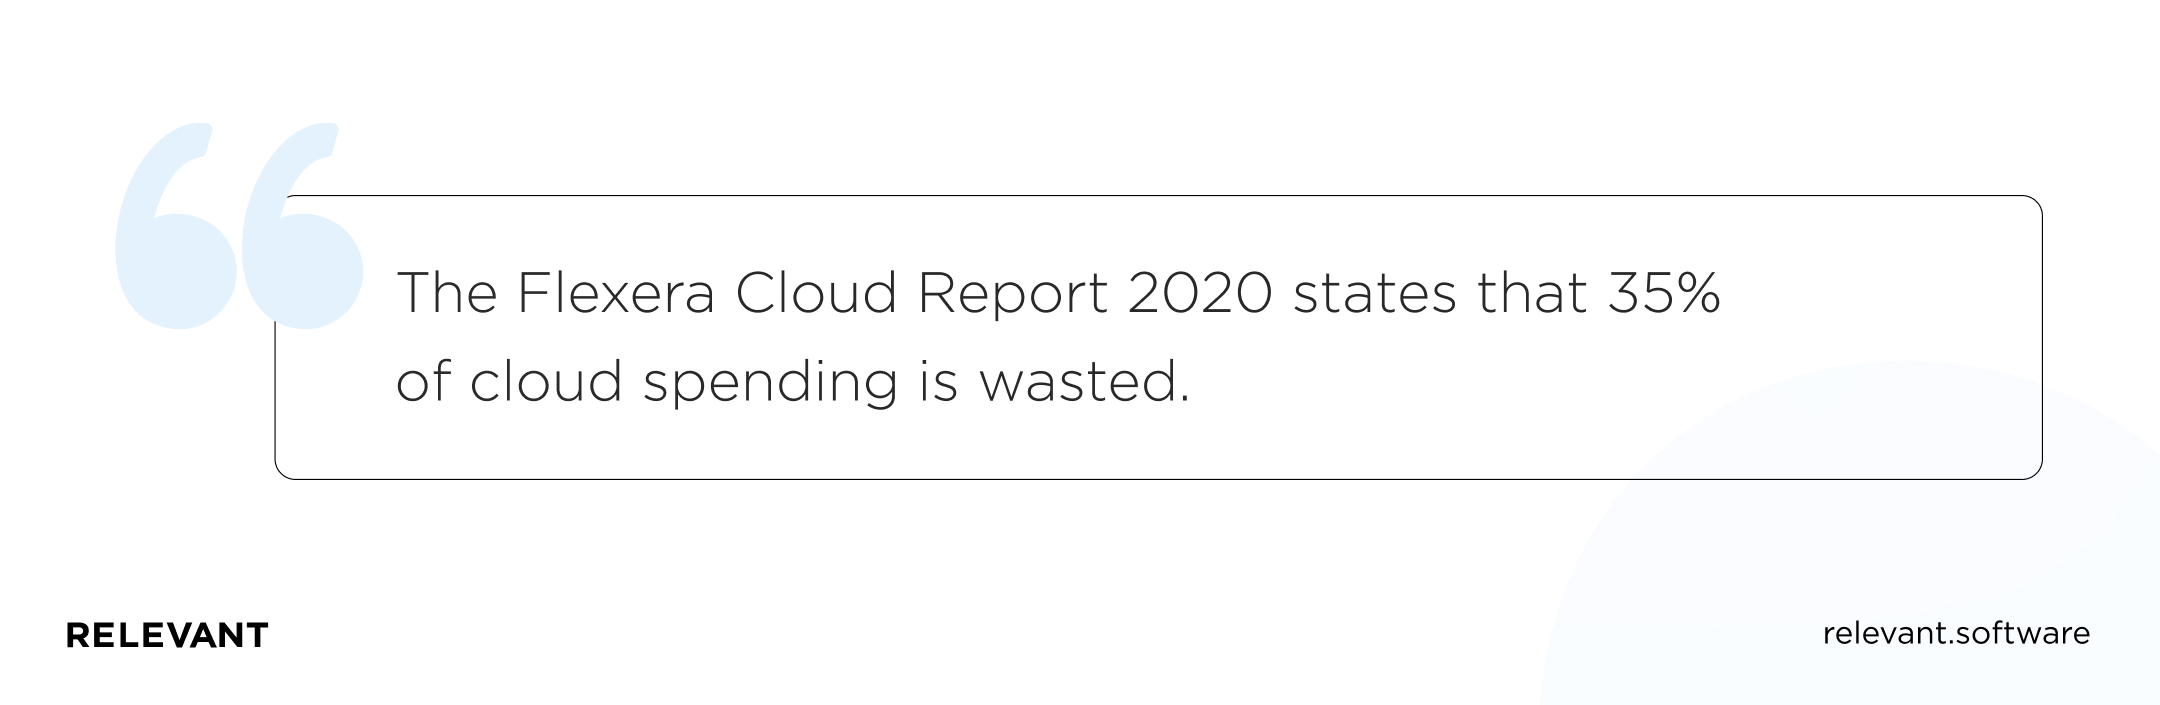 The Flexera Cloud Report 2020 states that 35% of cloud spending is wasted.